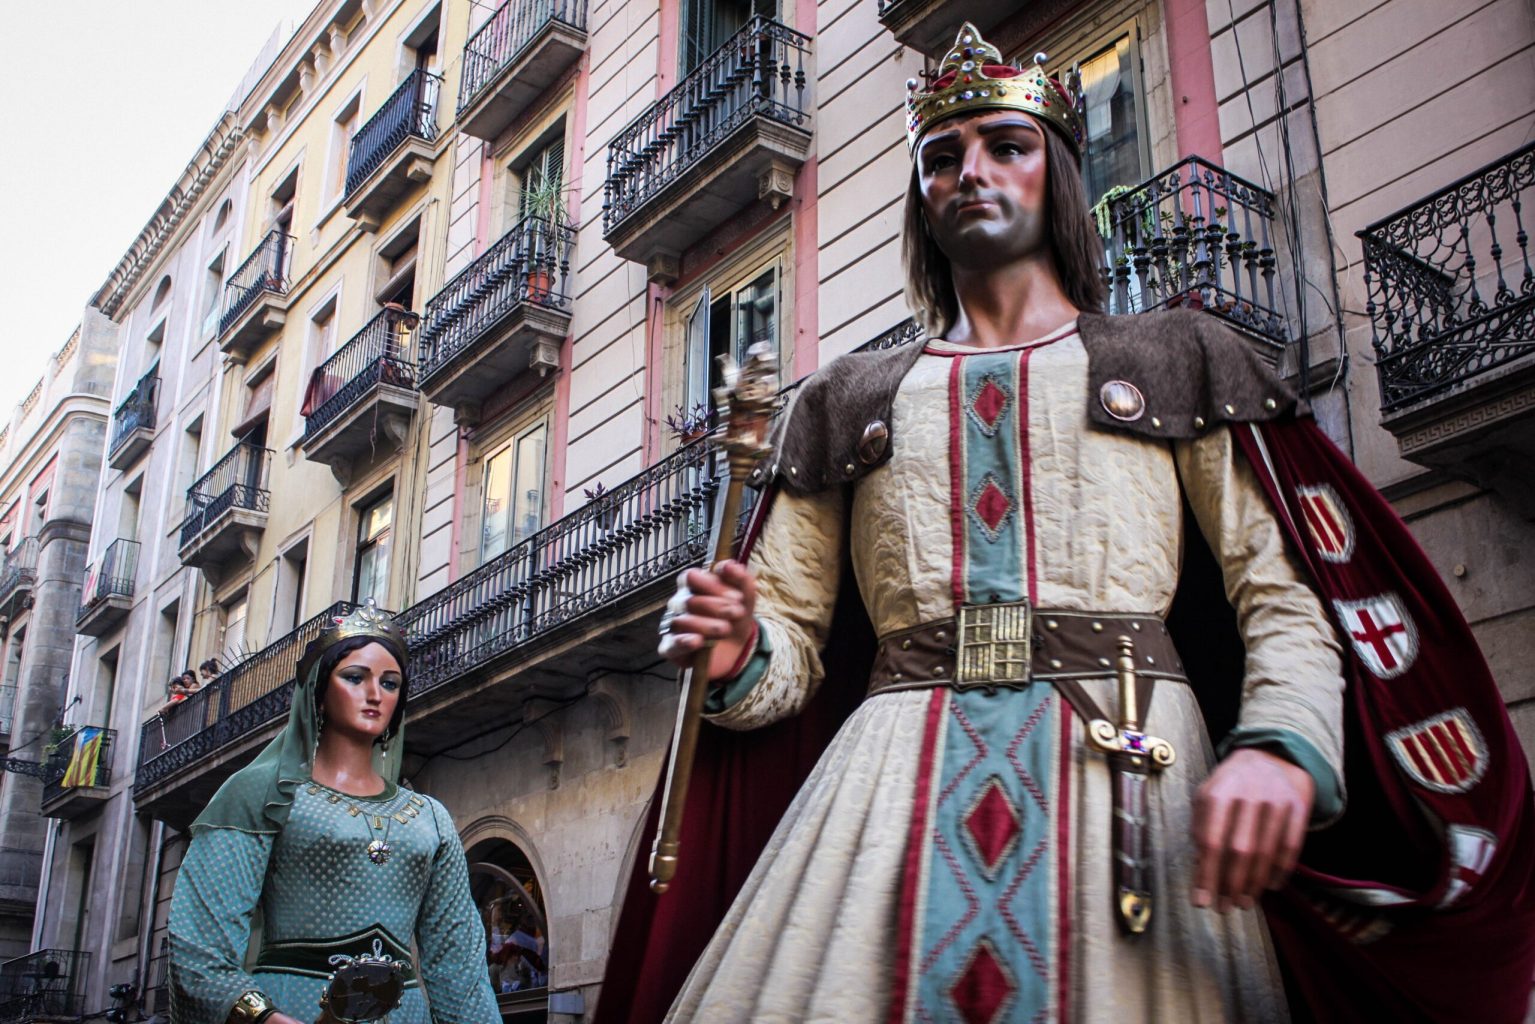 A man in a costume during the parade in the streets of Barcelona